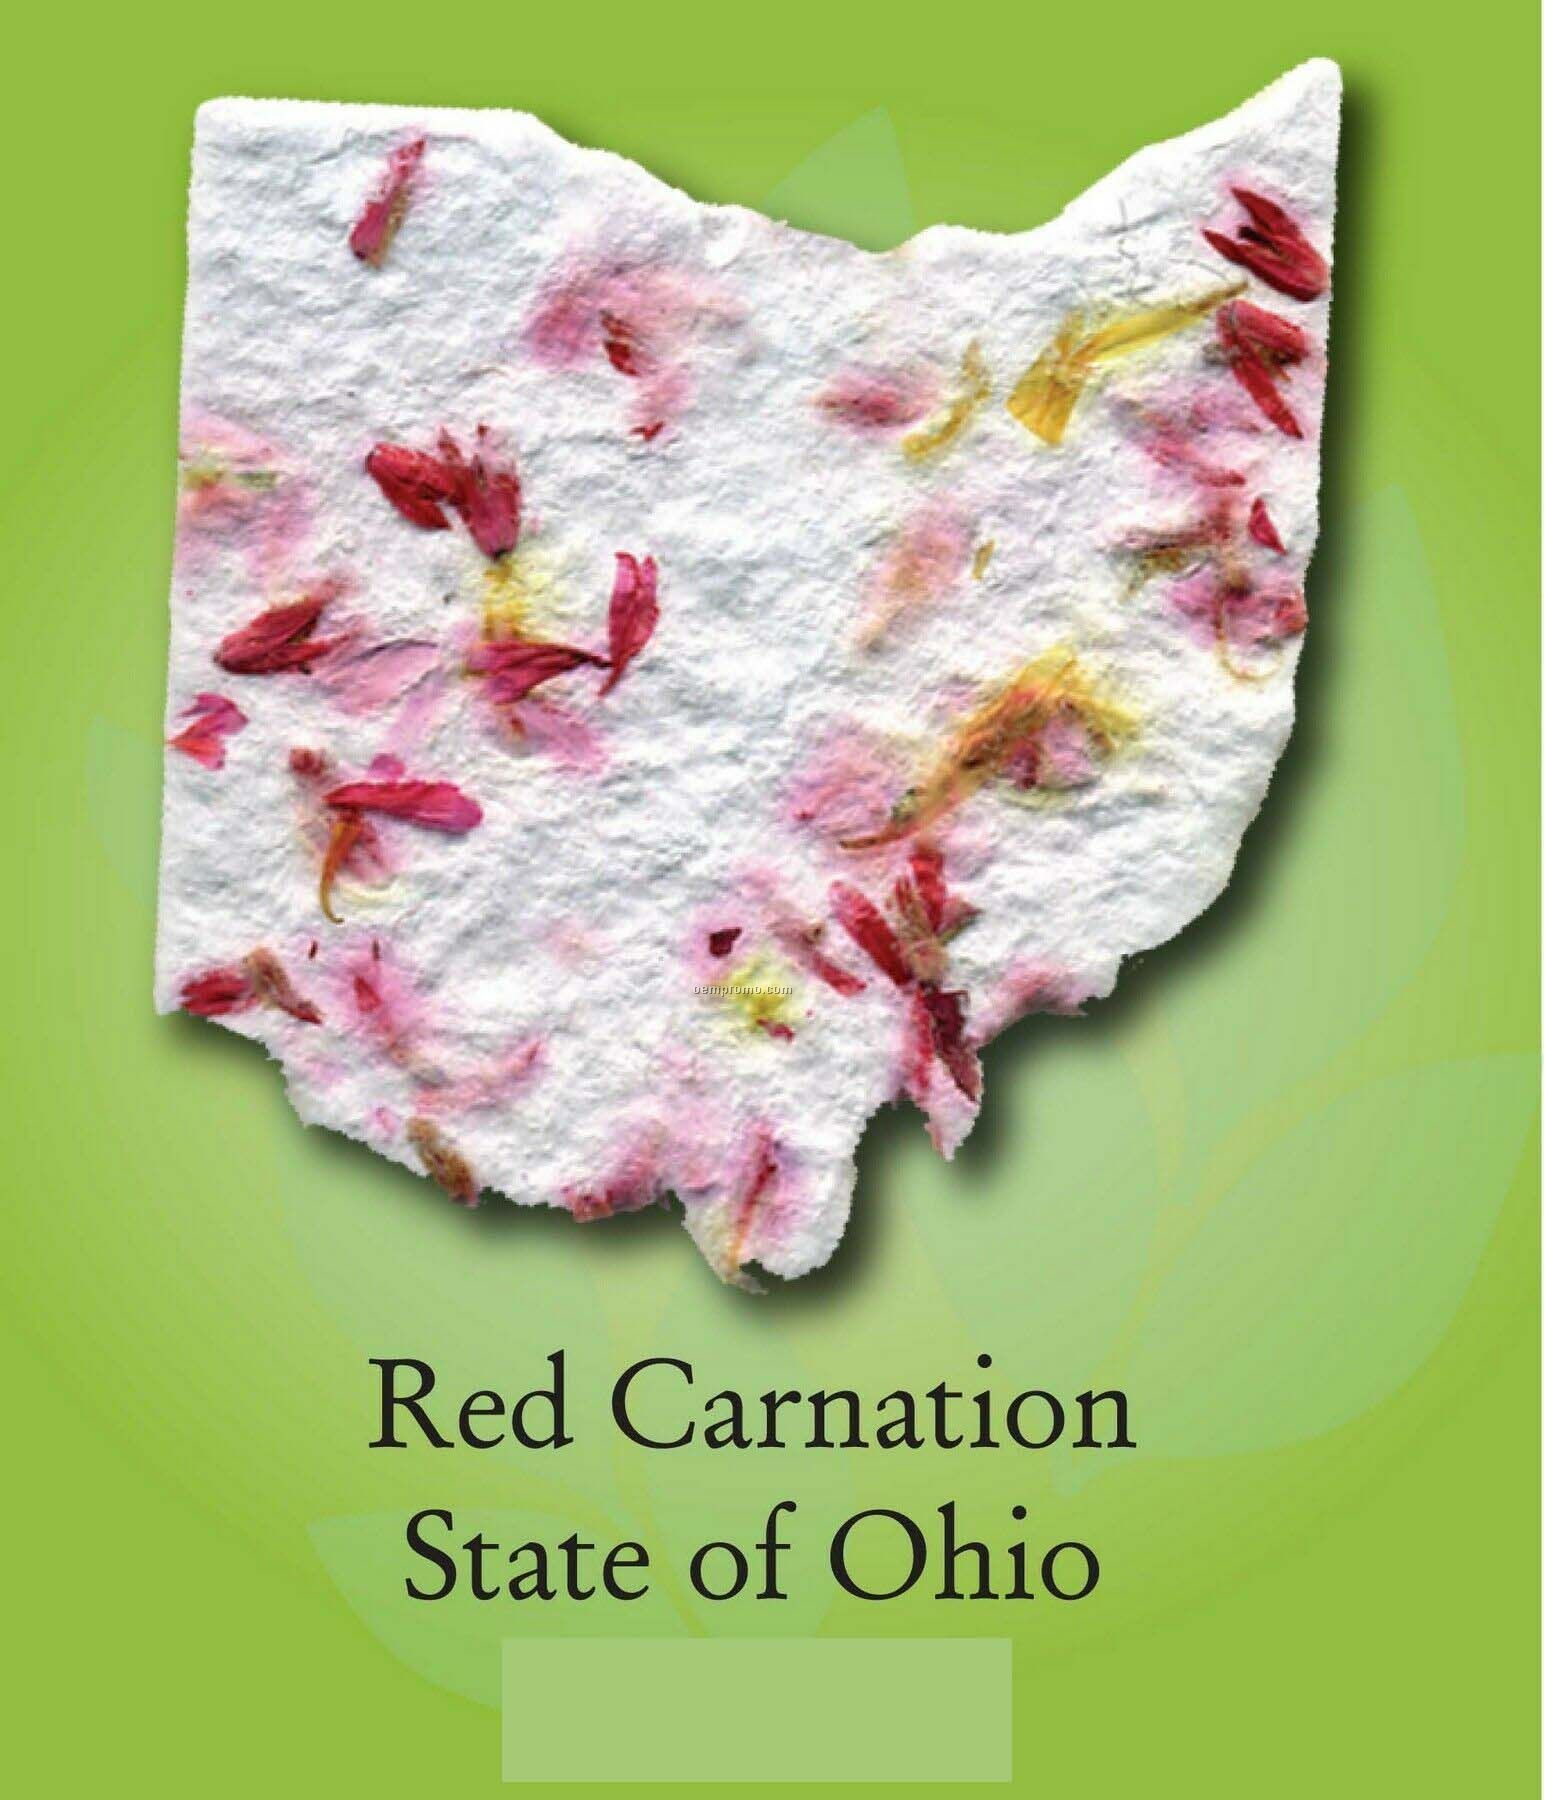 Red Carnation State Of Ohio Ornament With Embedded Seed